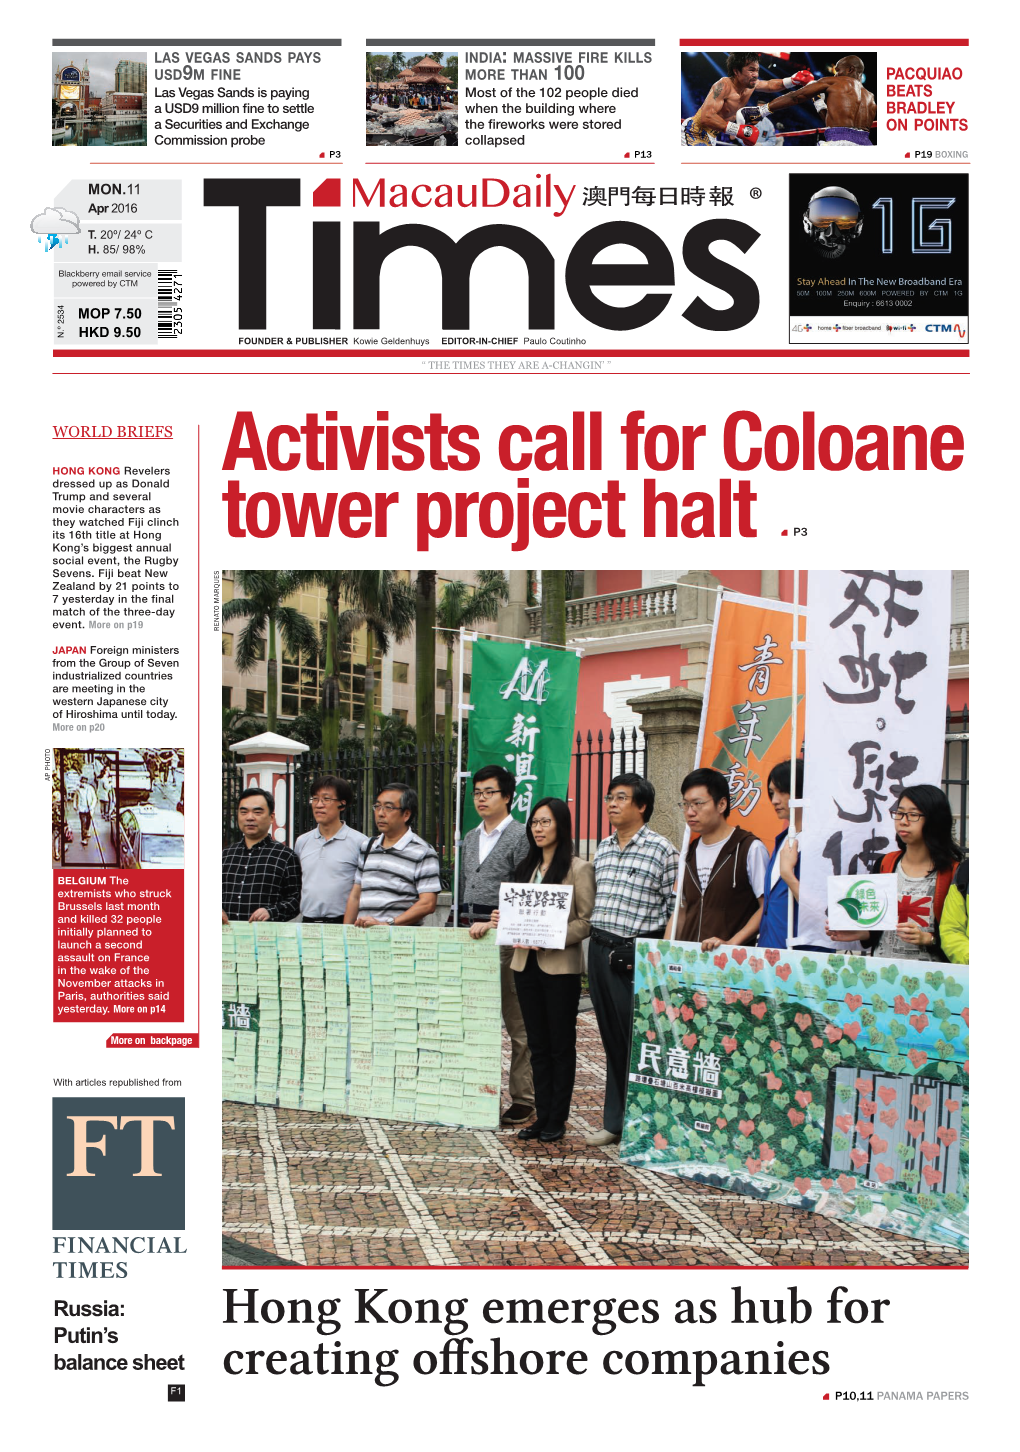 Activists Call for Coloane Tower Project Halt